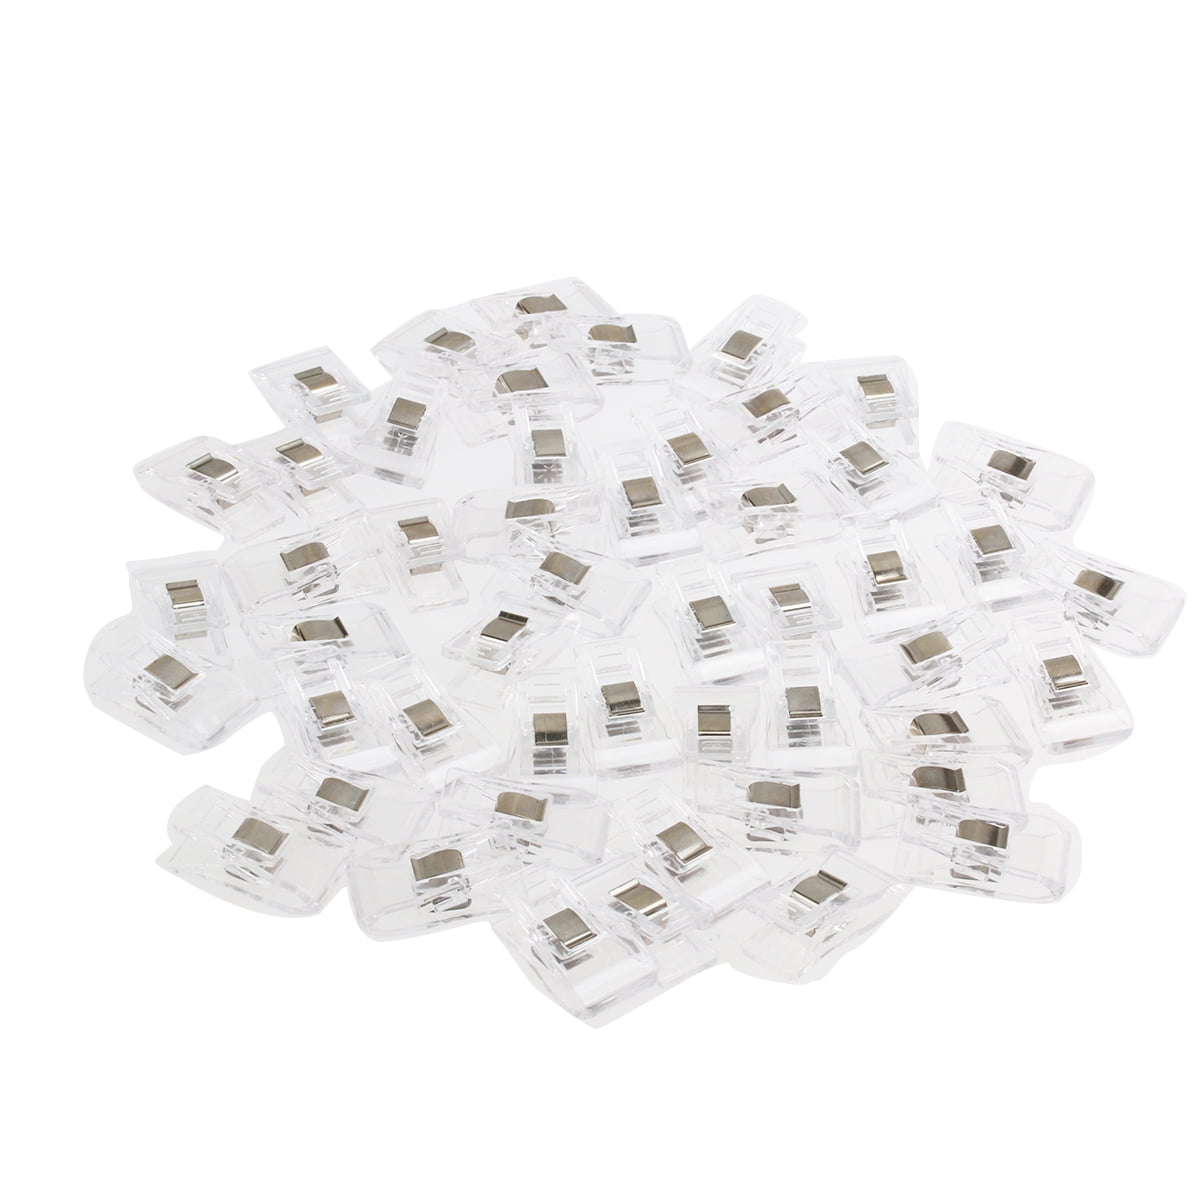 Pack of 50pcs Wonder Clips For Quilting Fabric Craft Knitting Sewing Crochet/ 